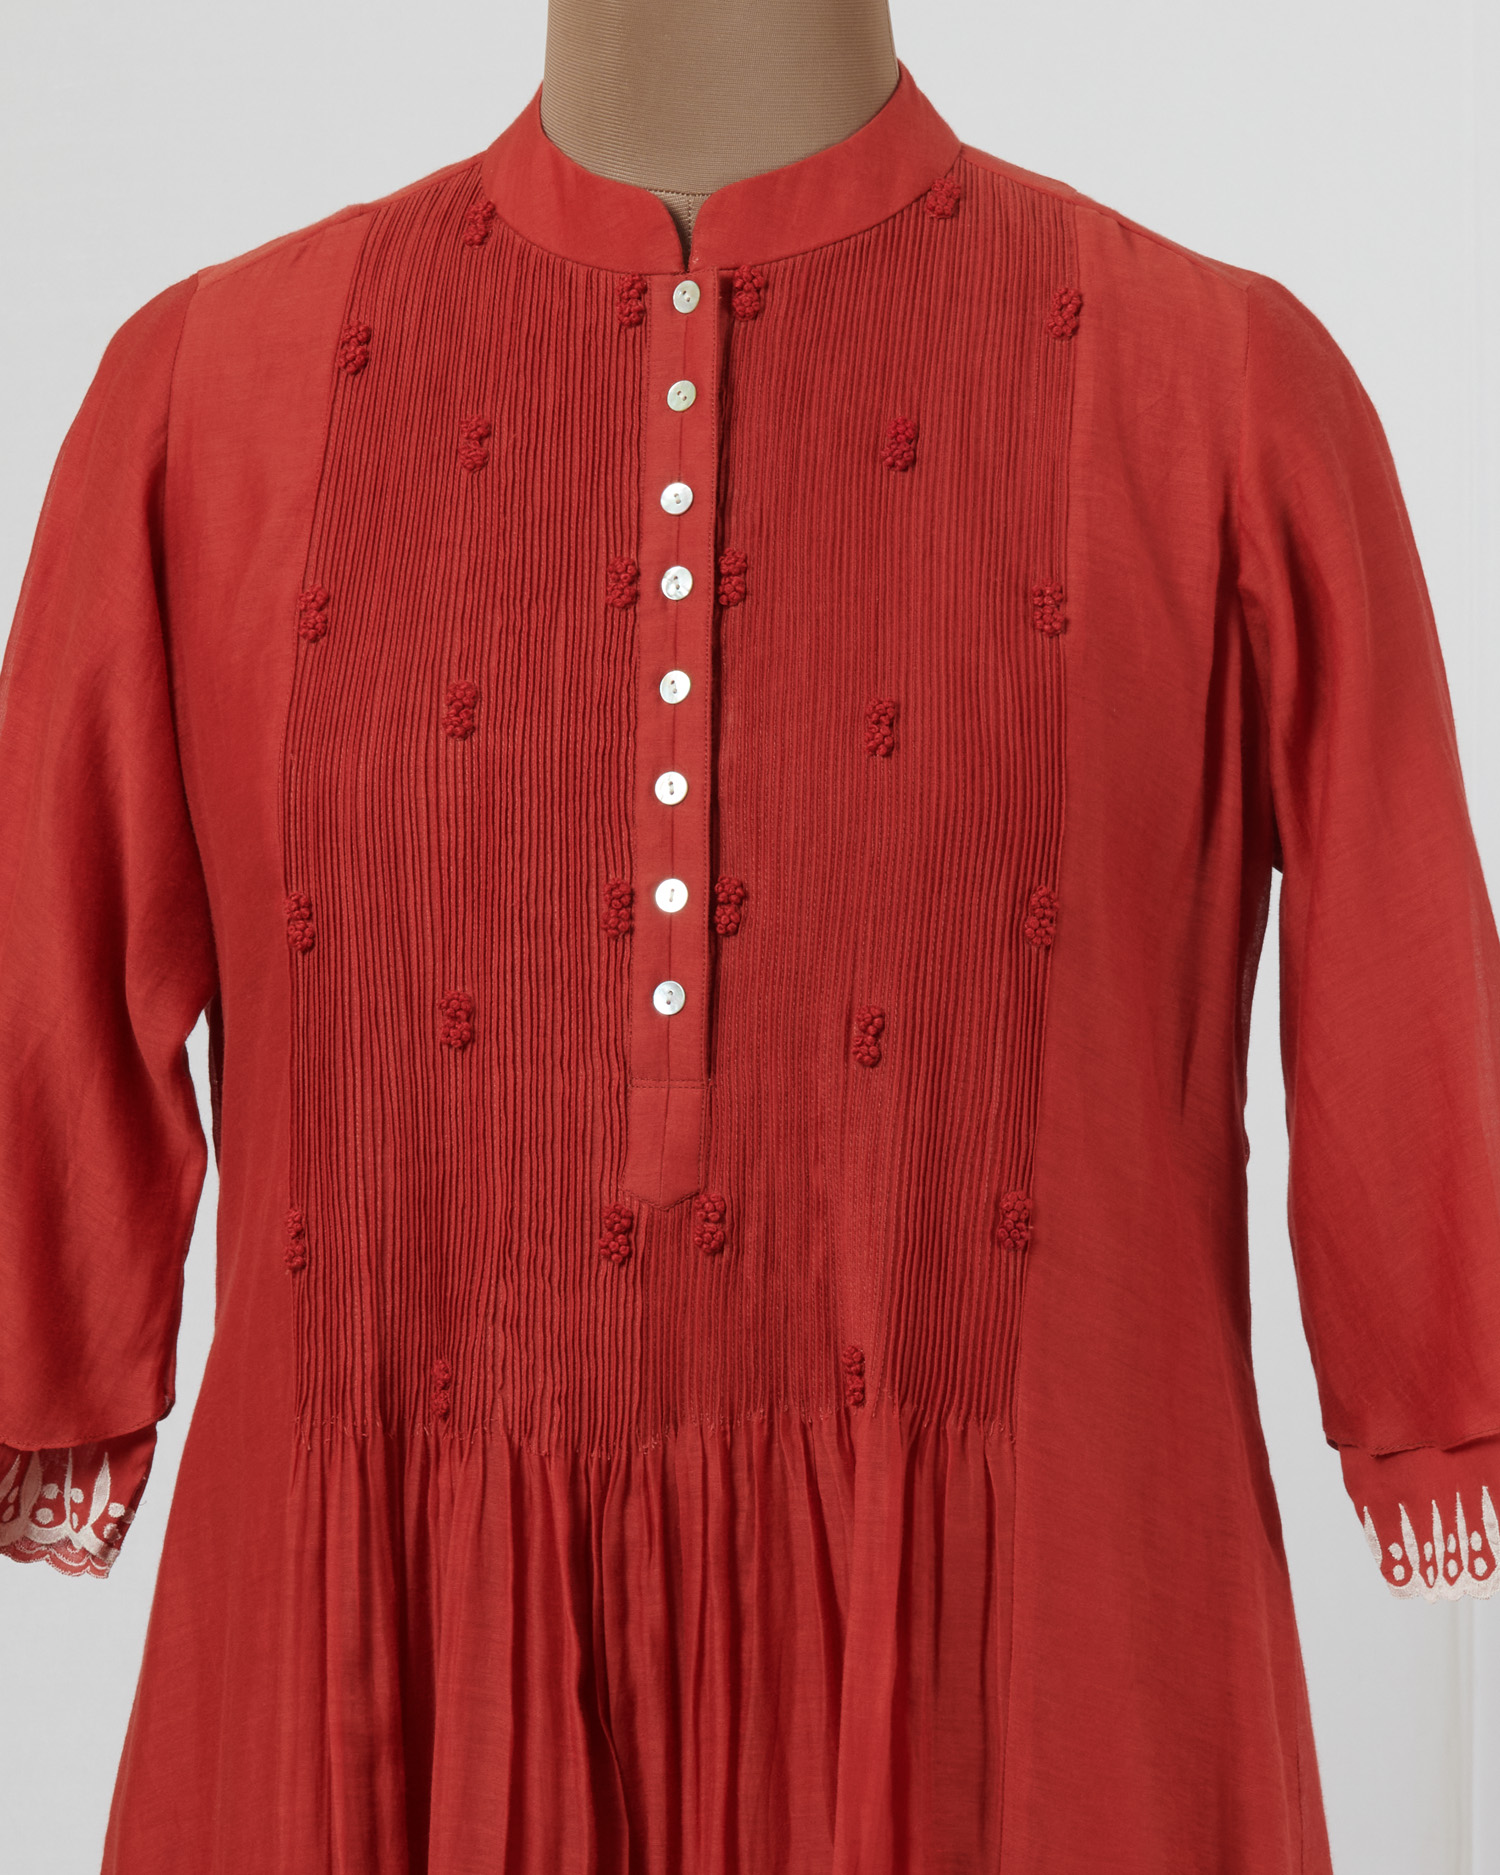 Chilli red dress layered in mulmul with applique and cutwork detail